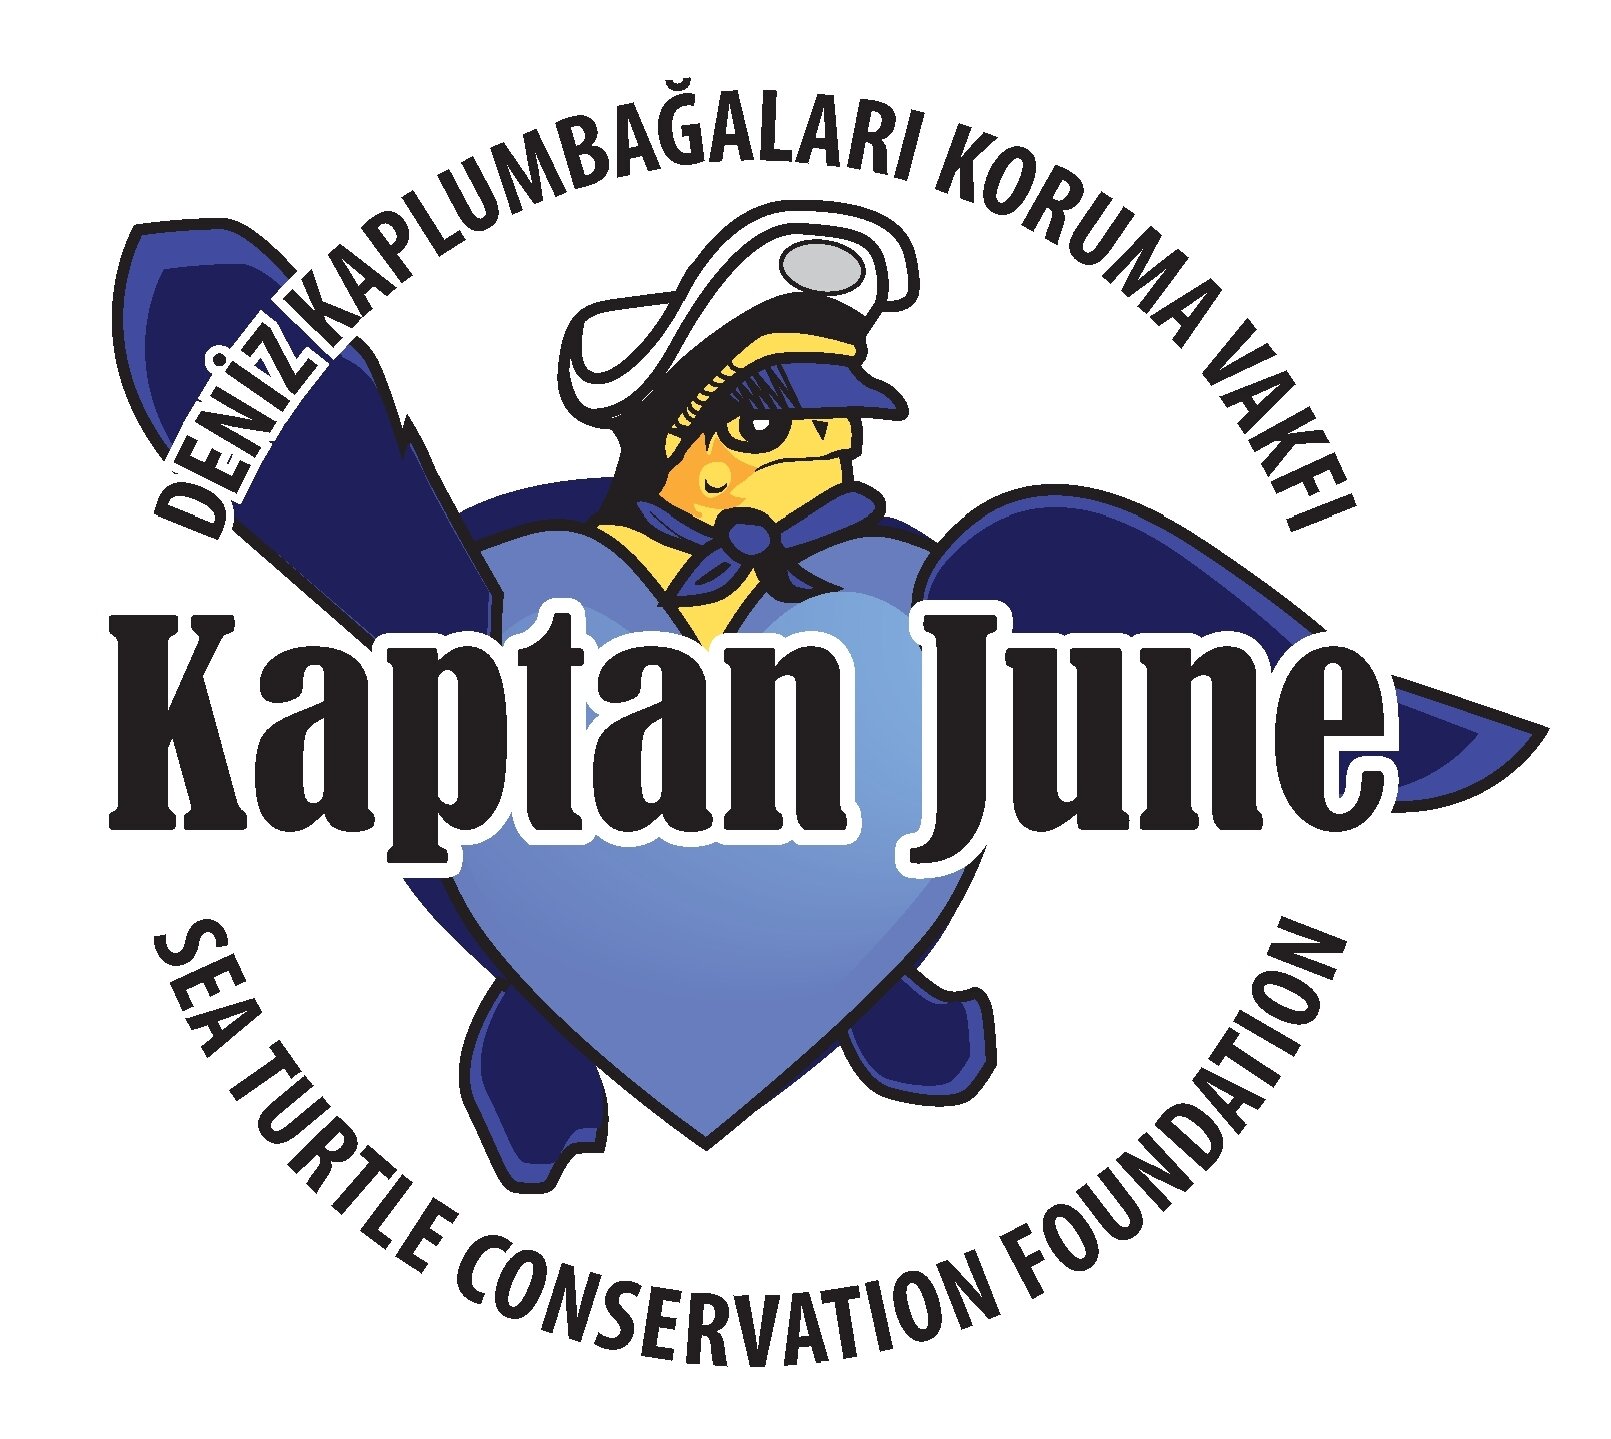 Founded by Kaptan June. Our mission is to Improve the welfare of sea turtles in the Mediterranean sea by education and awareness. http://t.co/ZQfq9mwgXf